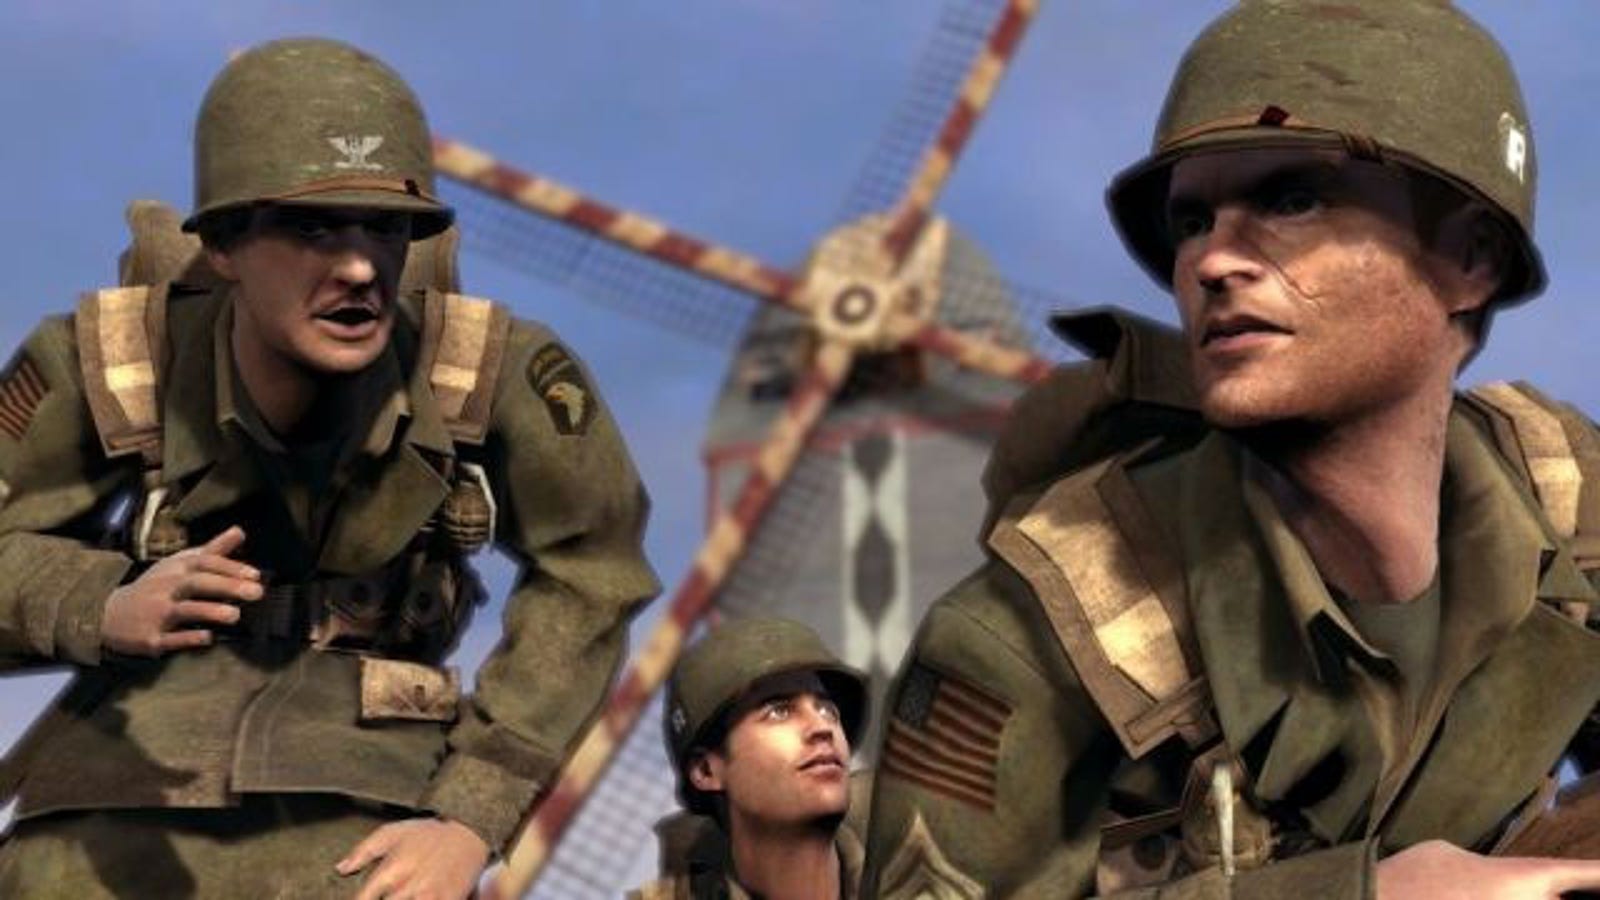 There's A Normal Brothers In Arms Game Coming